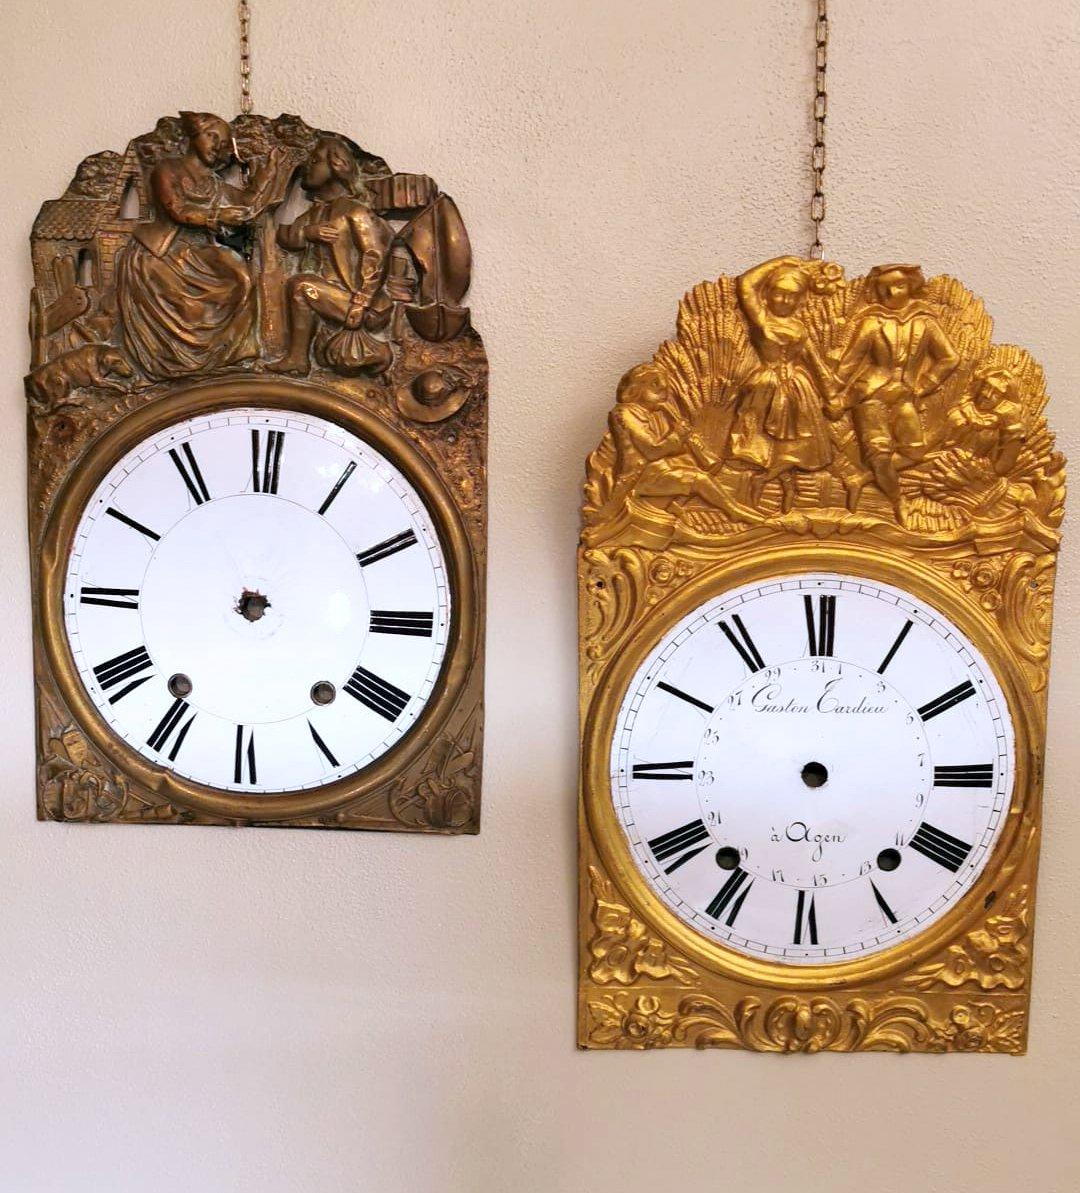 These two particular pediments were originally parts of antique pendulum clocks; the central circular portion is in white fire enamel with fine Roman numerals in black and is set on an embossed and gilded brass plate; on the gilded and burnished one